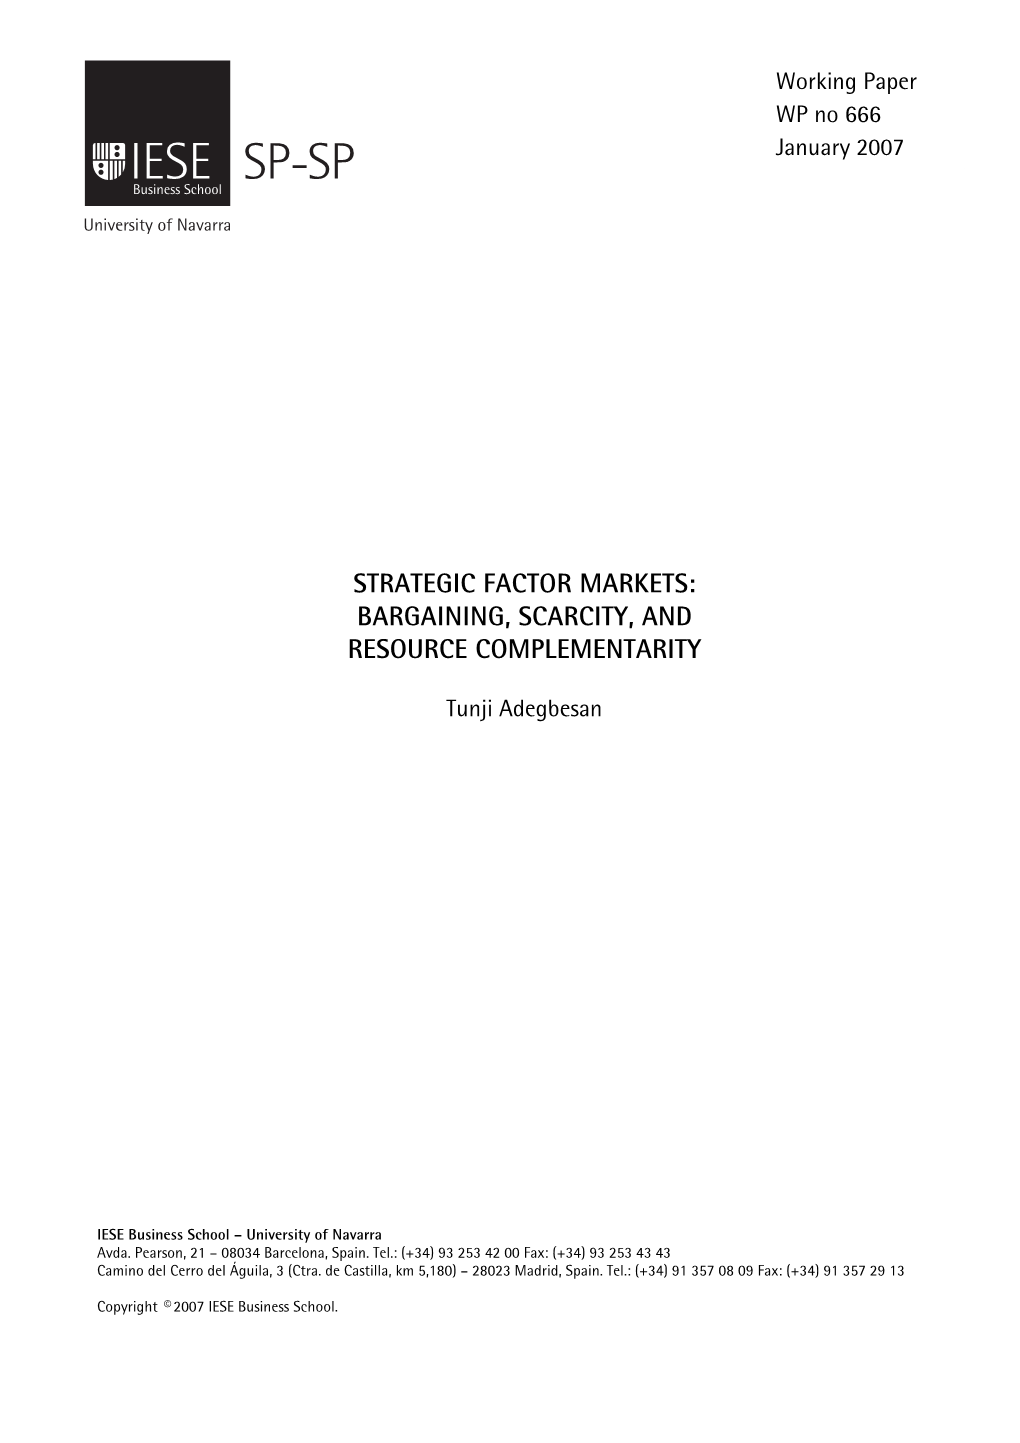 Strategic Factor Markets: Bargaining, Scarcity, and Resource Complementarity